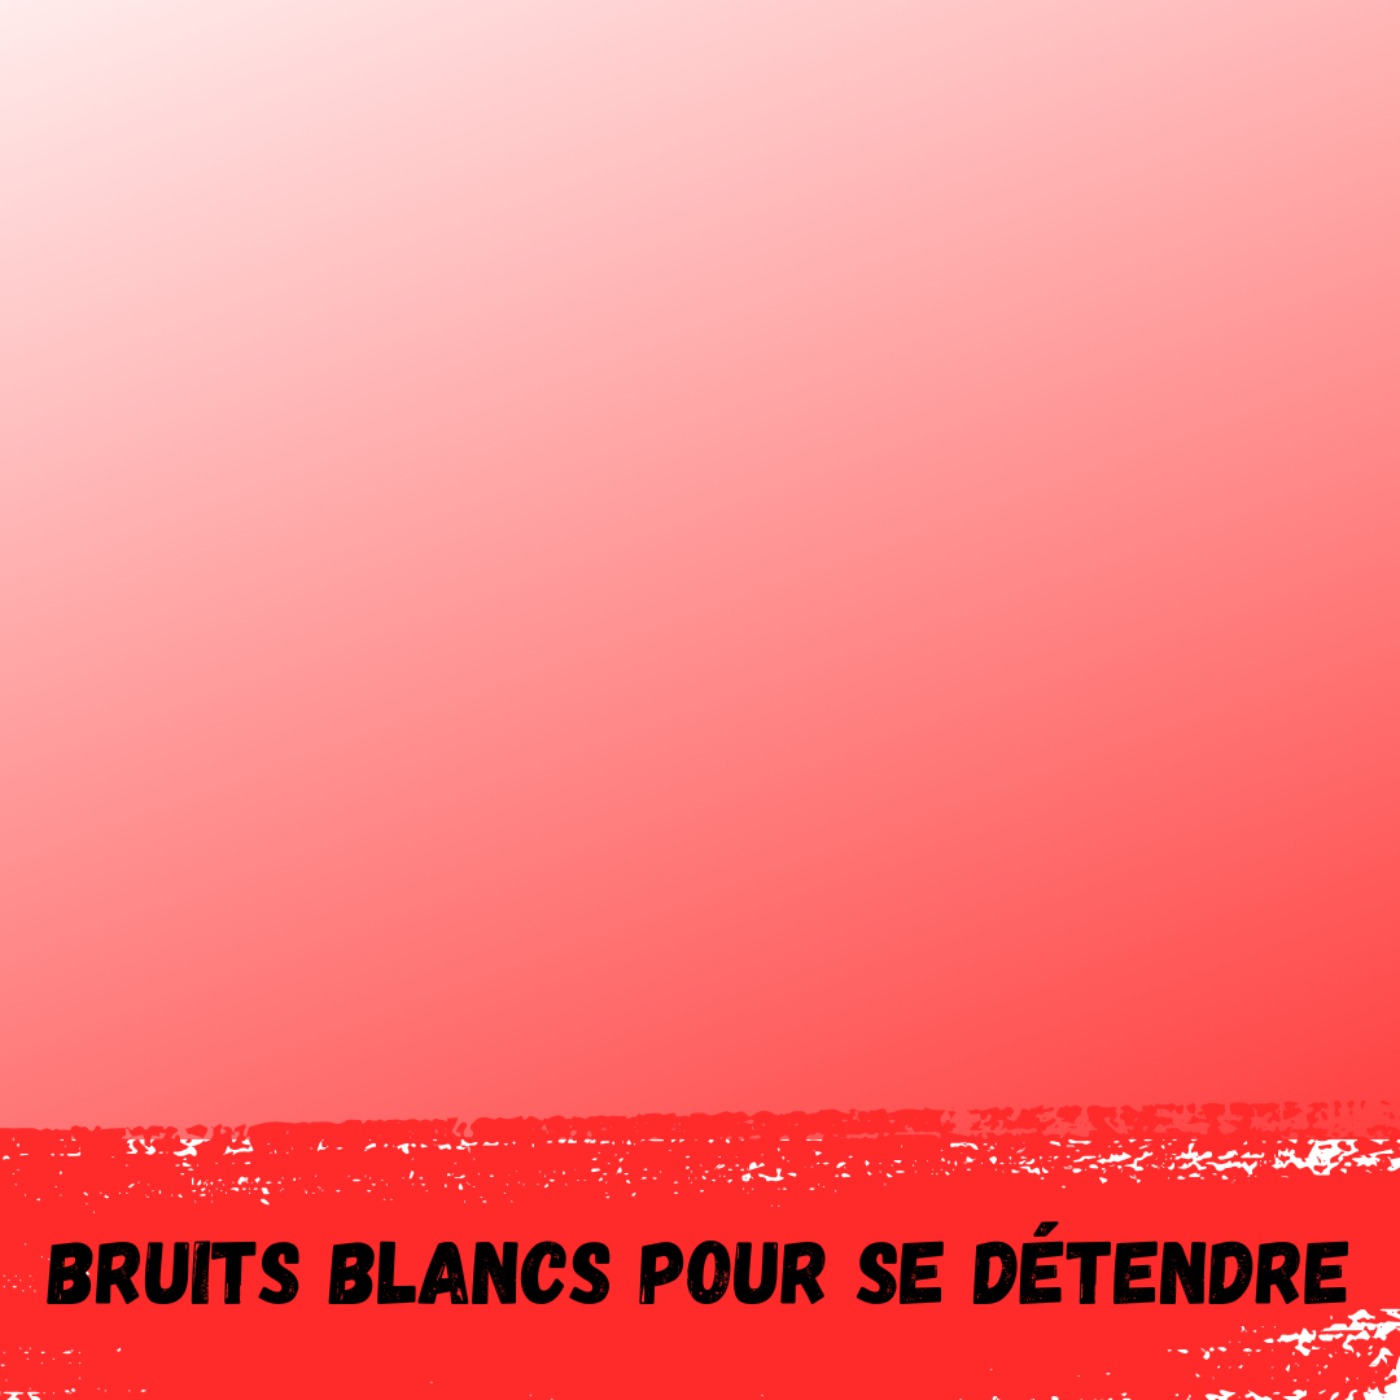 2h - Bruit rouge / Red noise